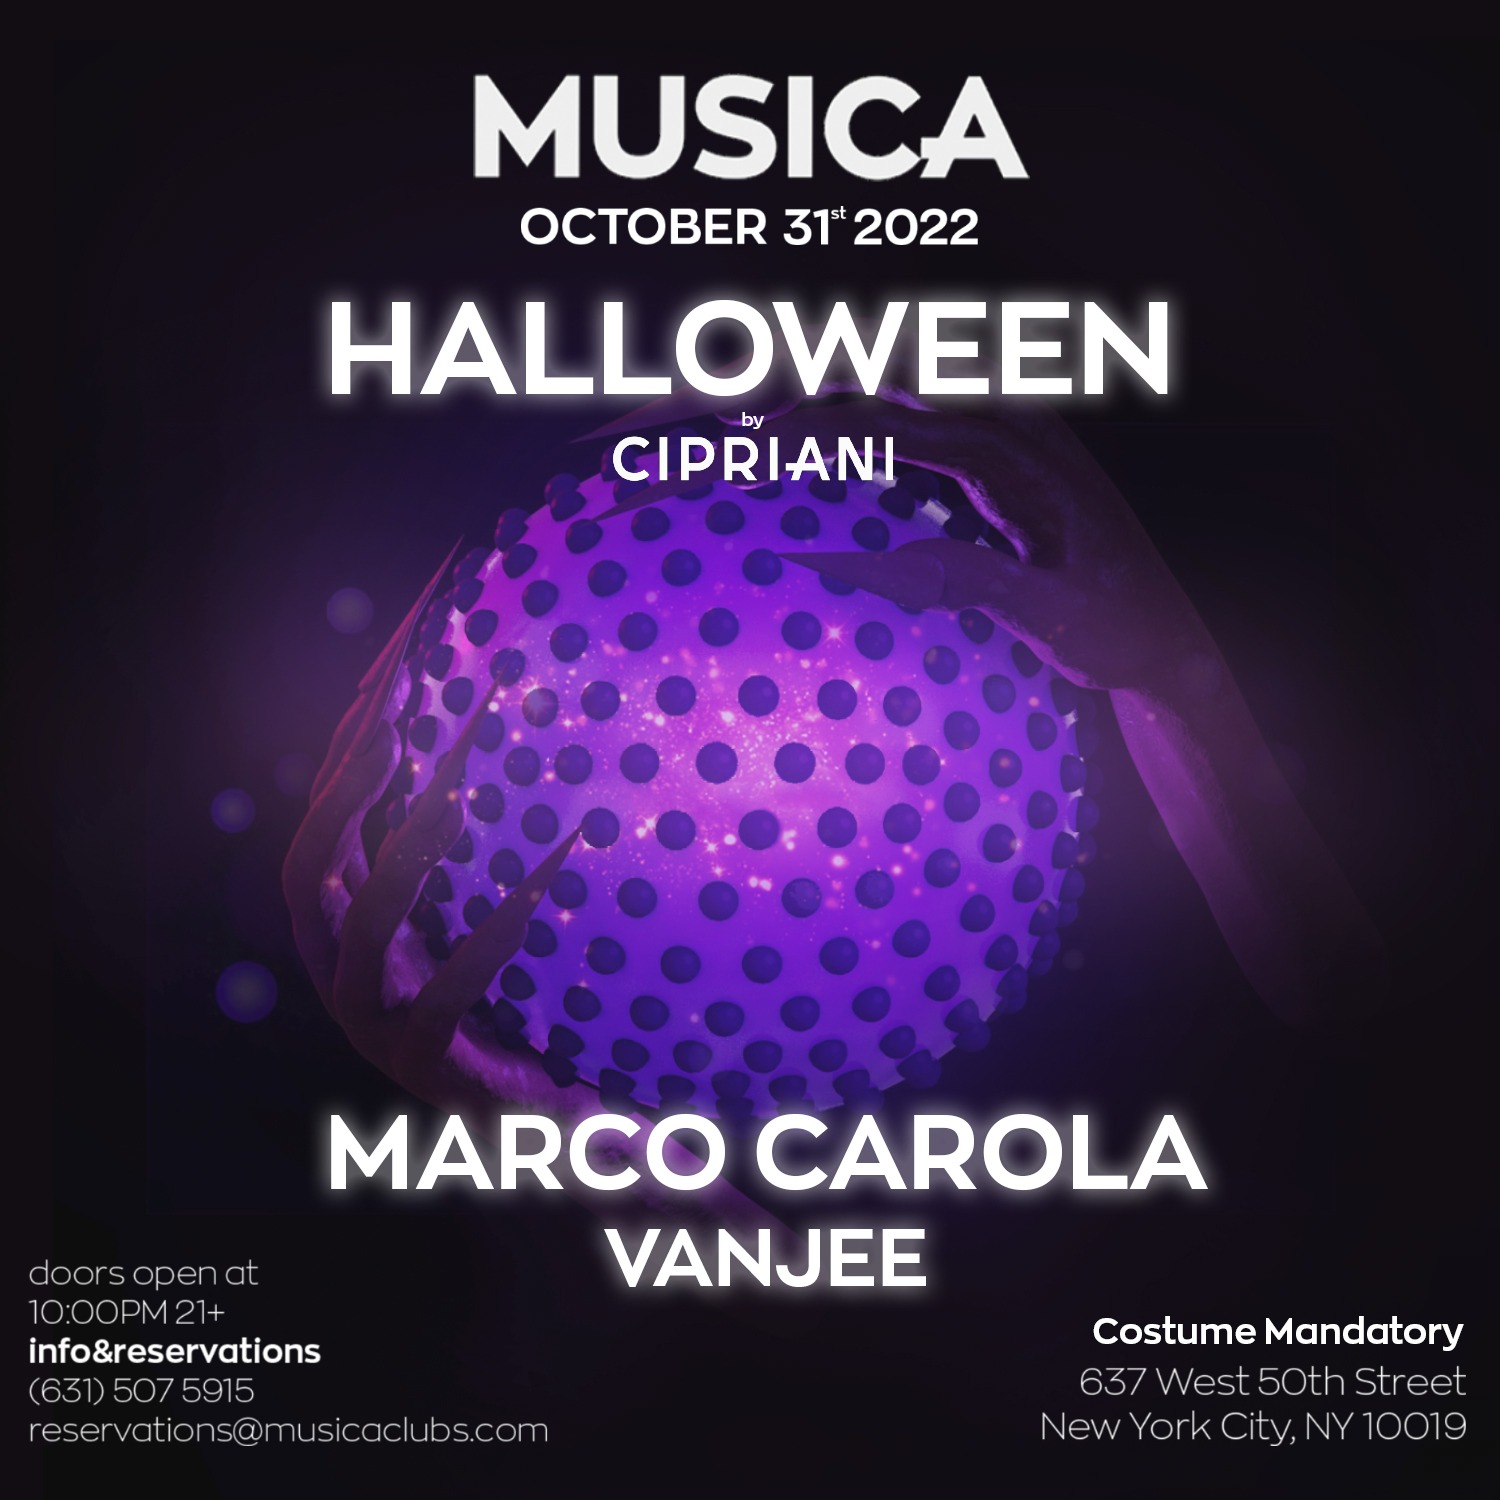 Halloween by Cipriani